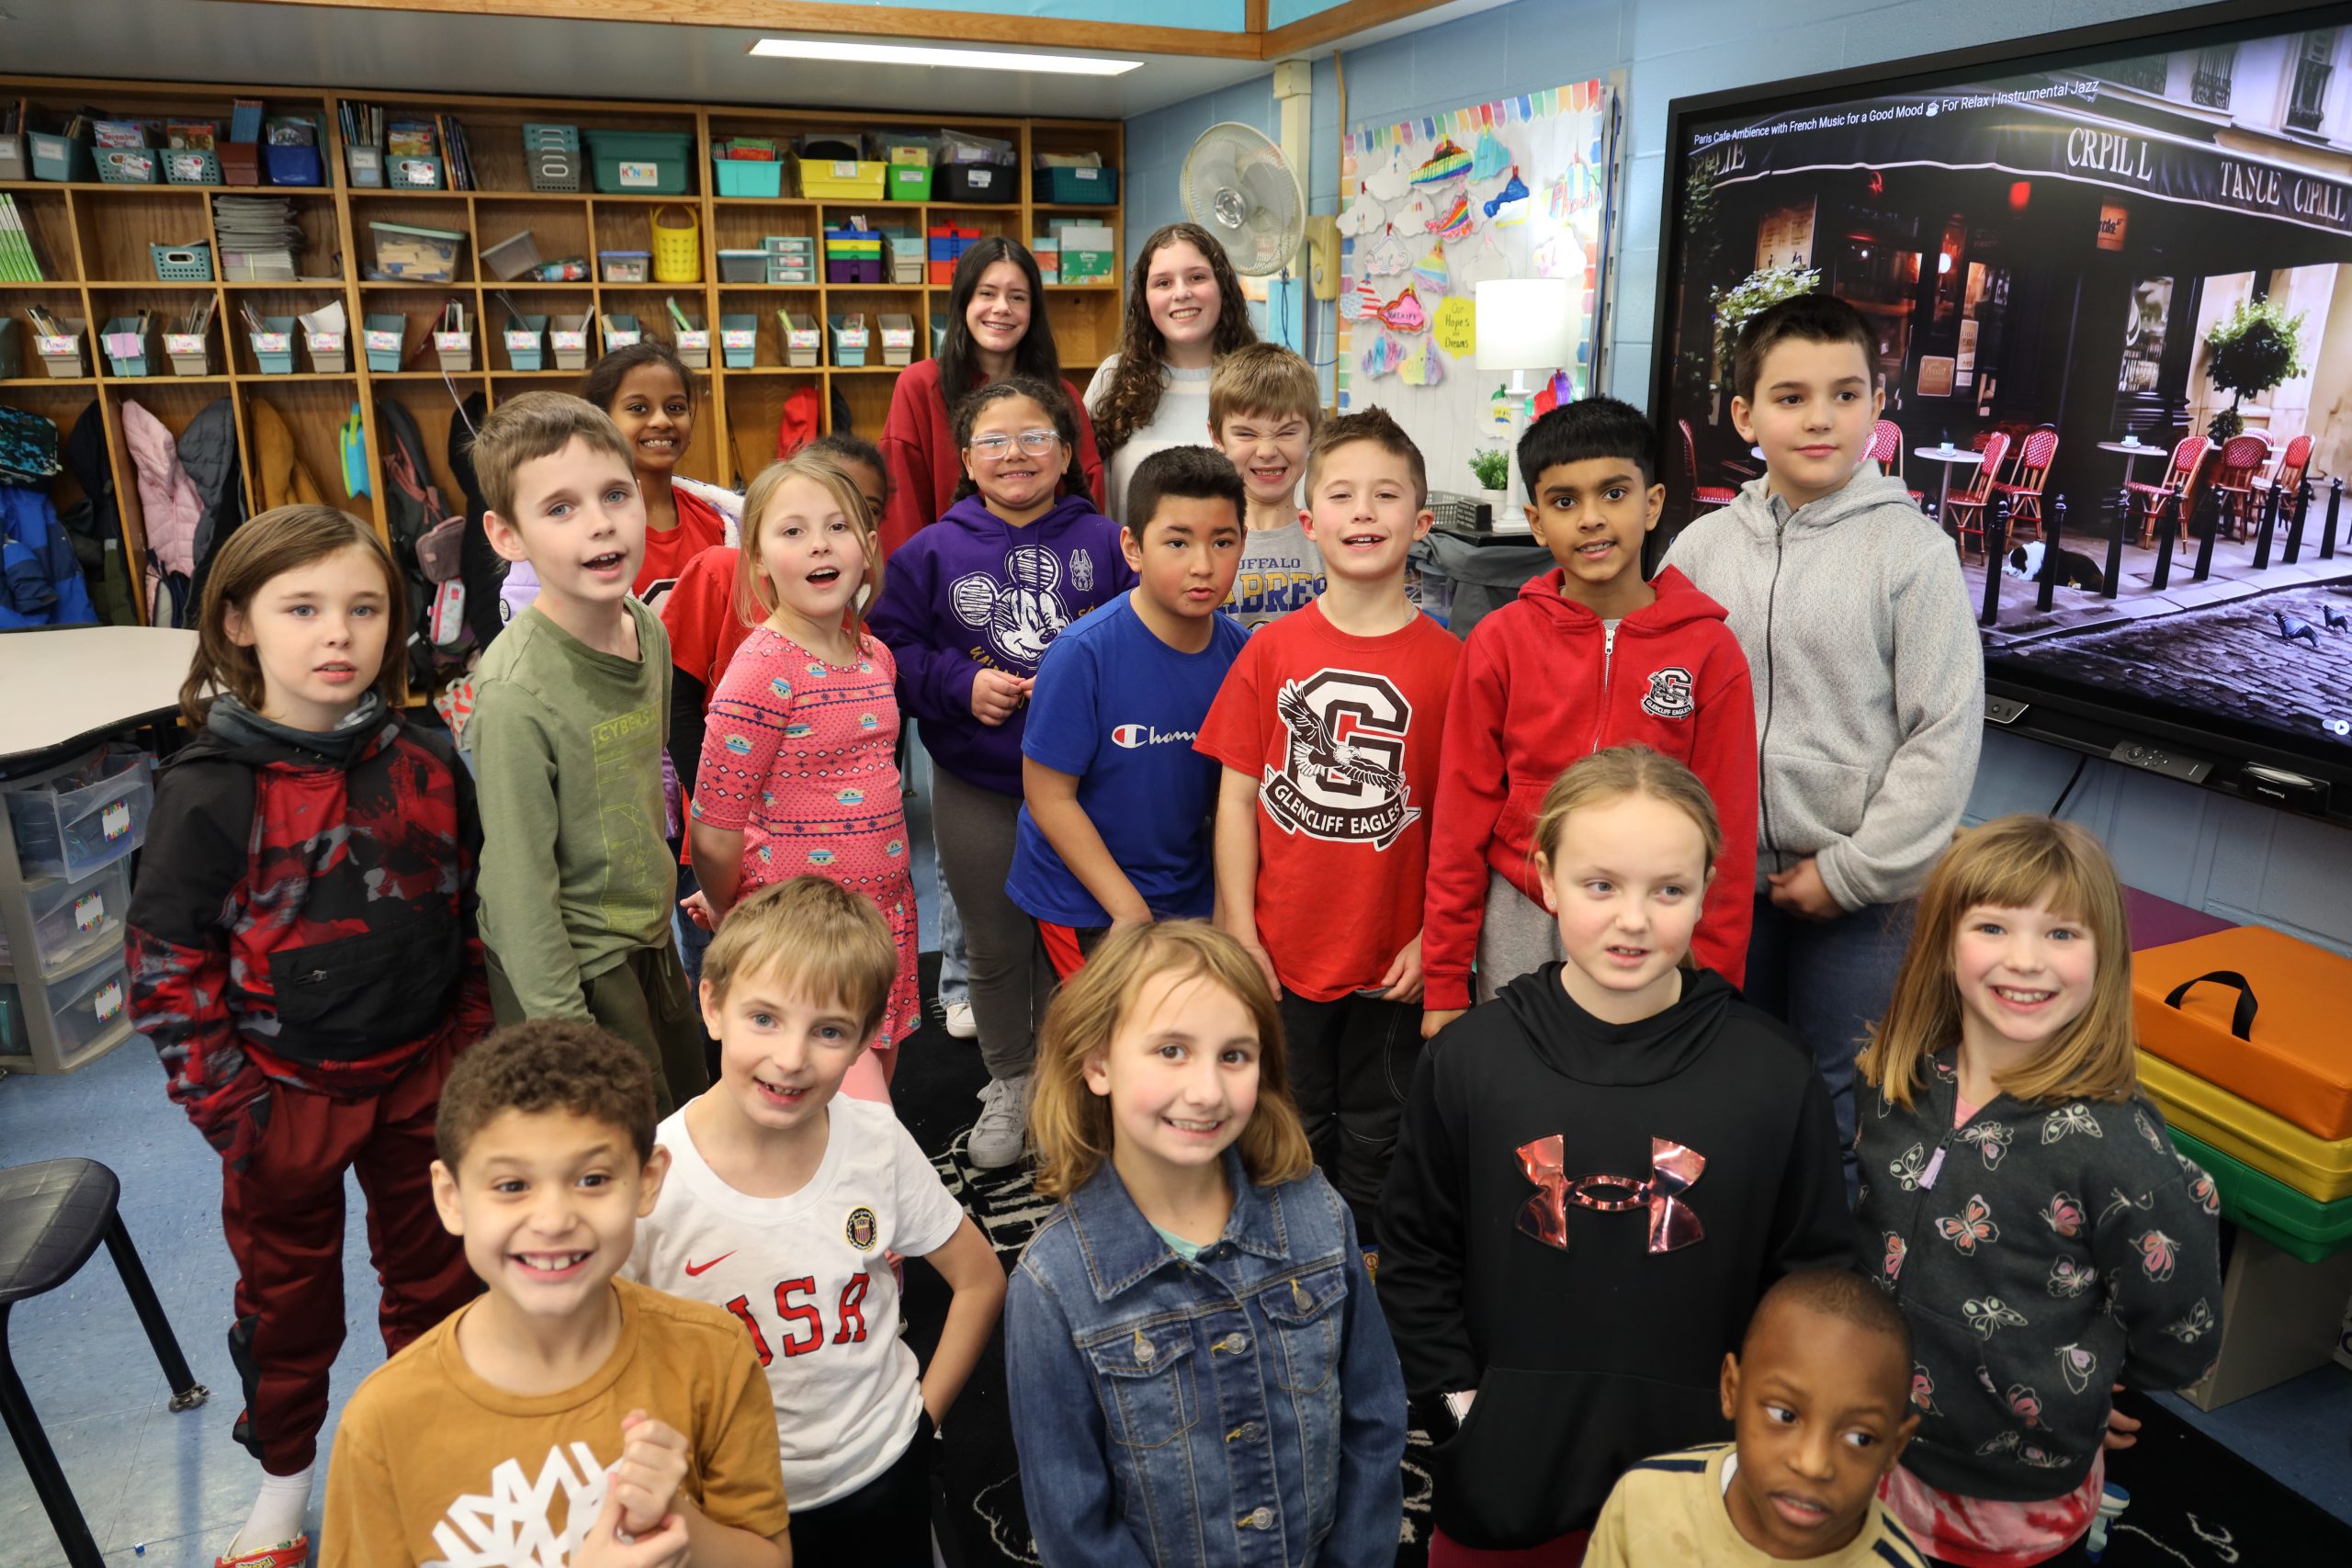 Peri Levine and Alana Fulmsbee read "Bonsoir Lune" (Goodnight Moon) to Mrs. McDonald's third grade class at Glencliff.